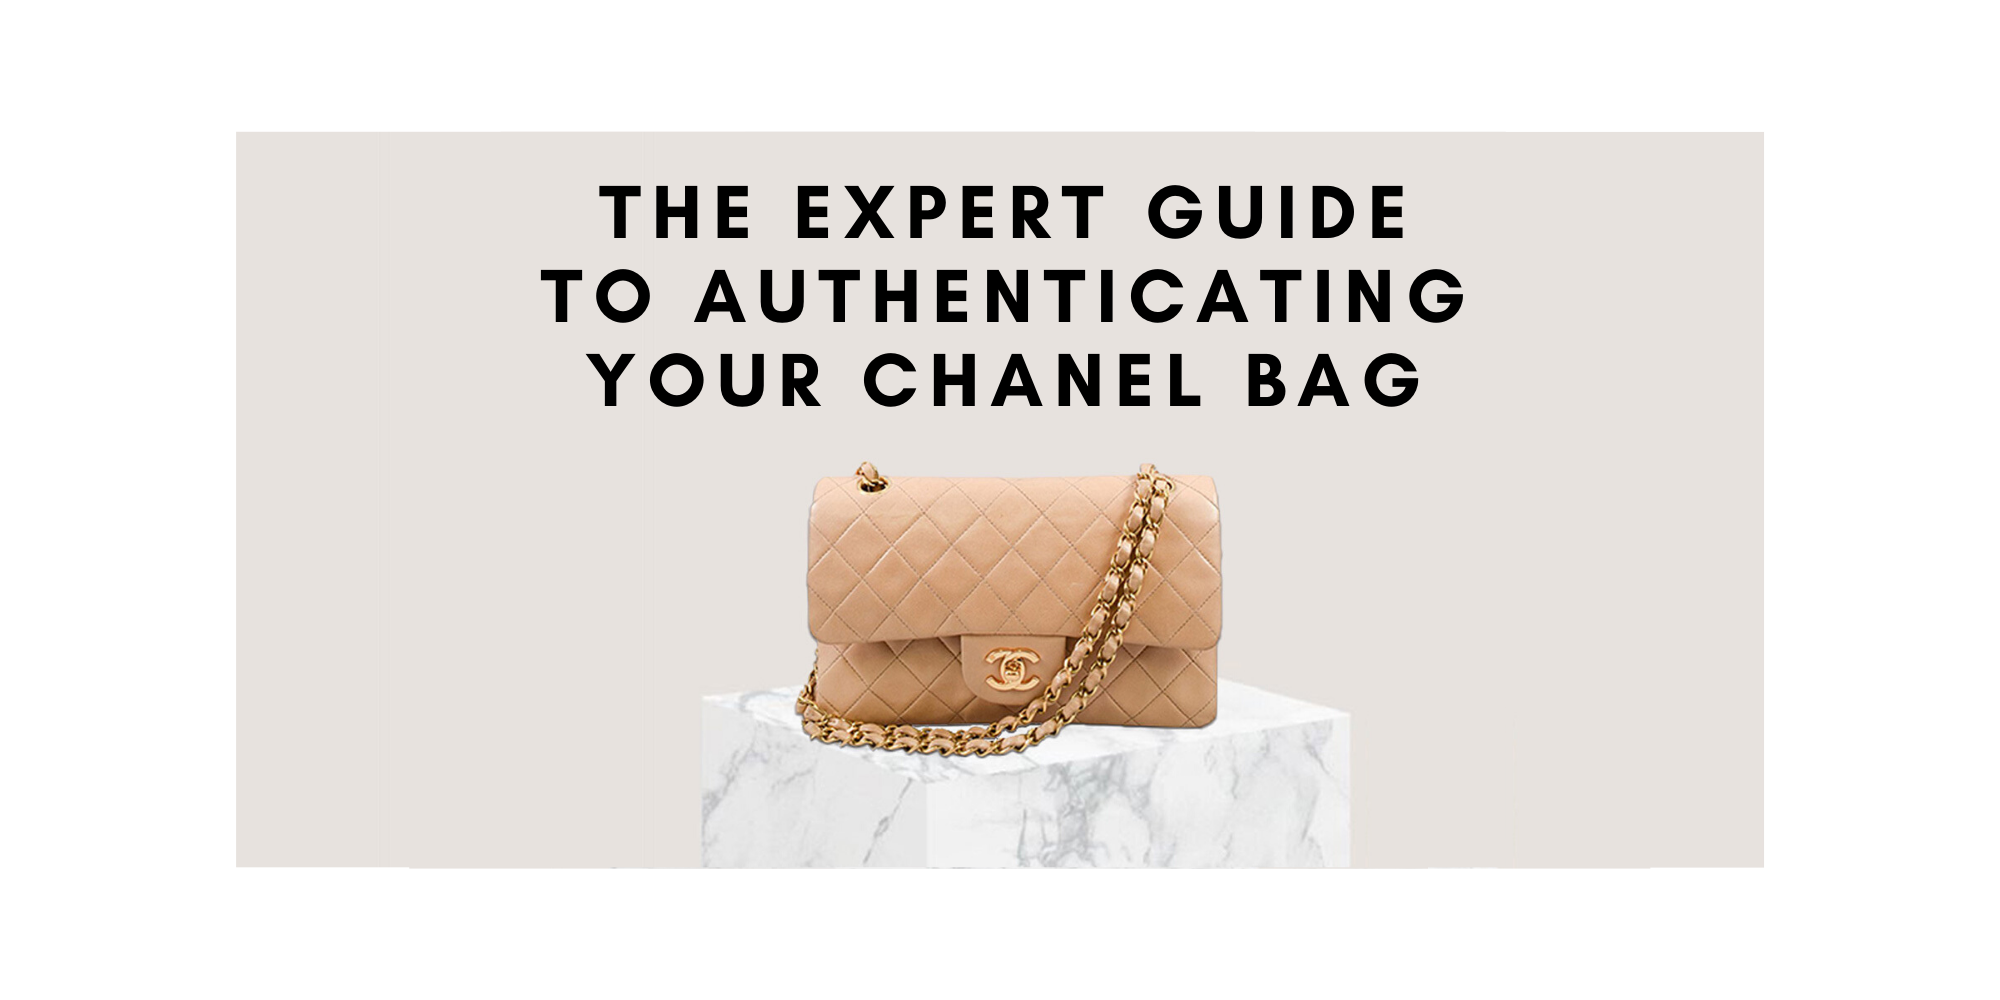 How To Authenticate A Chanel Bag